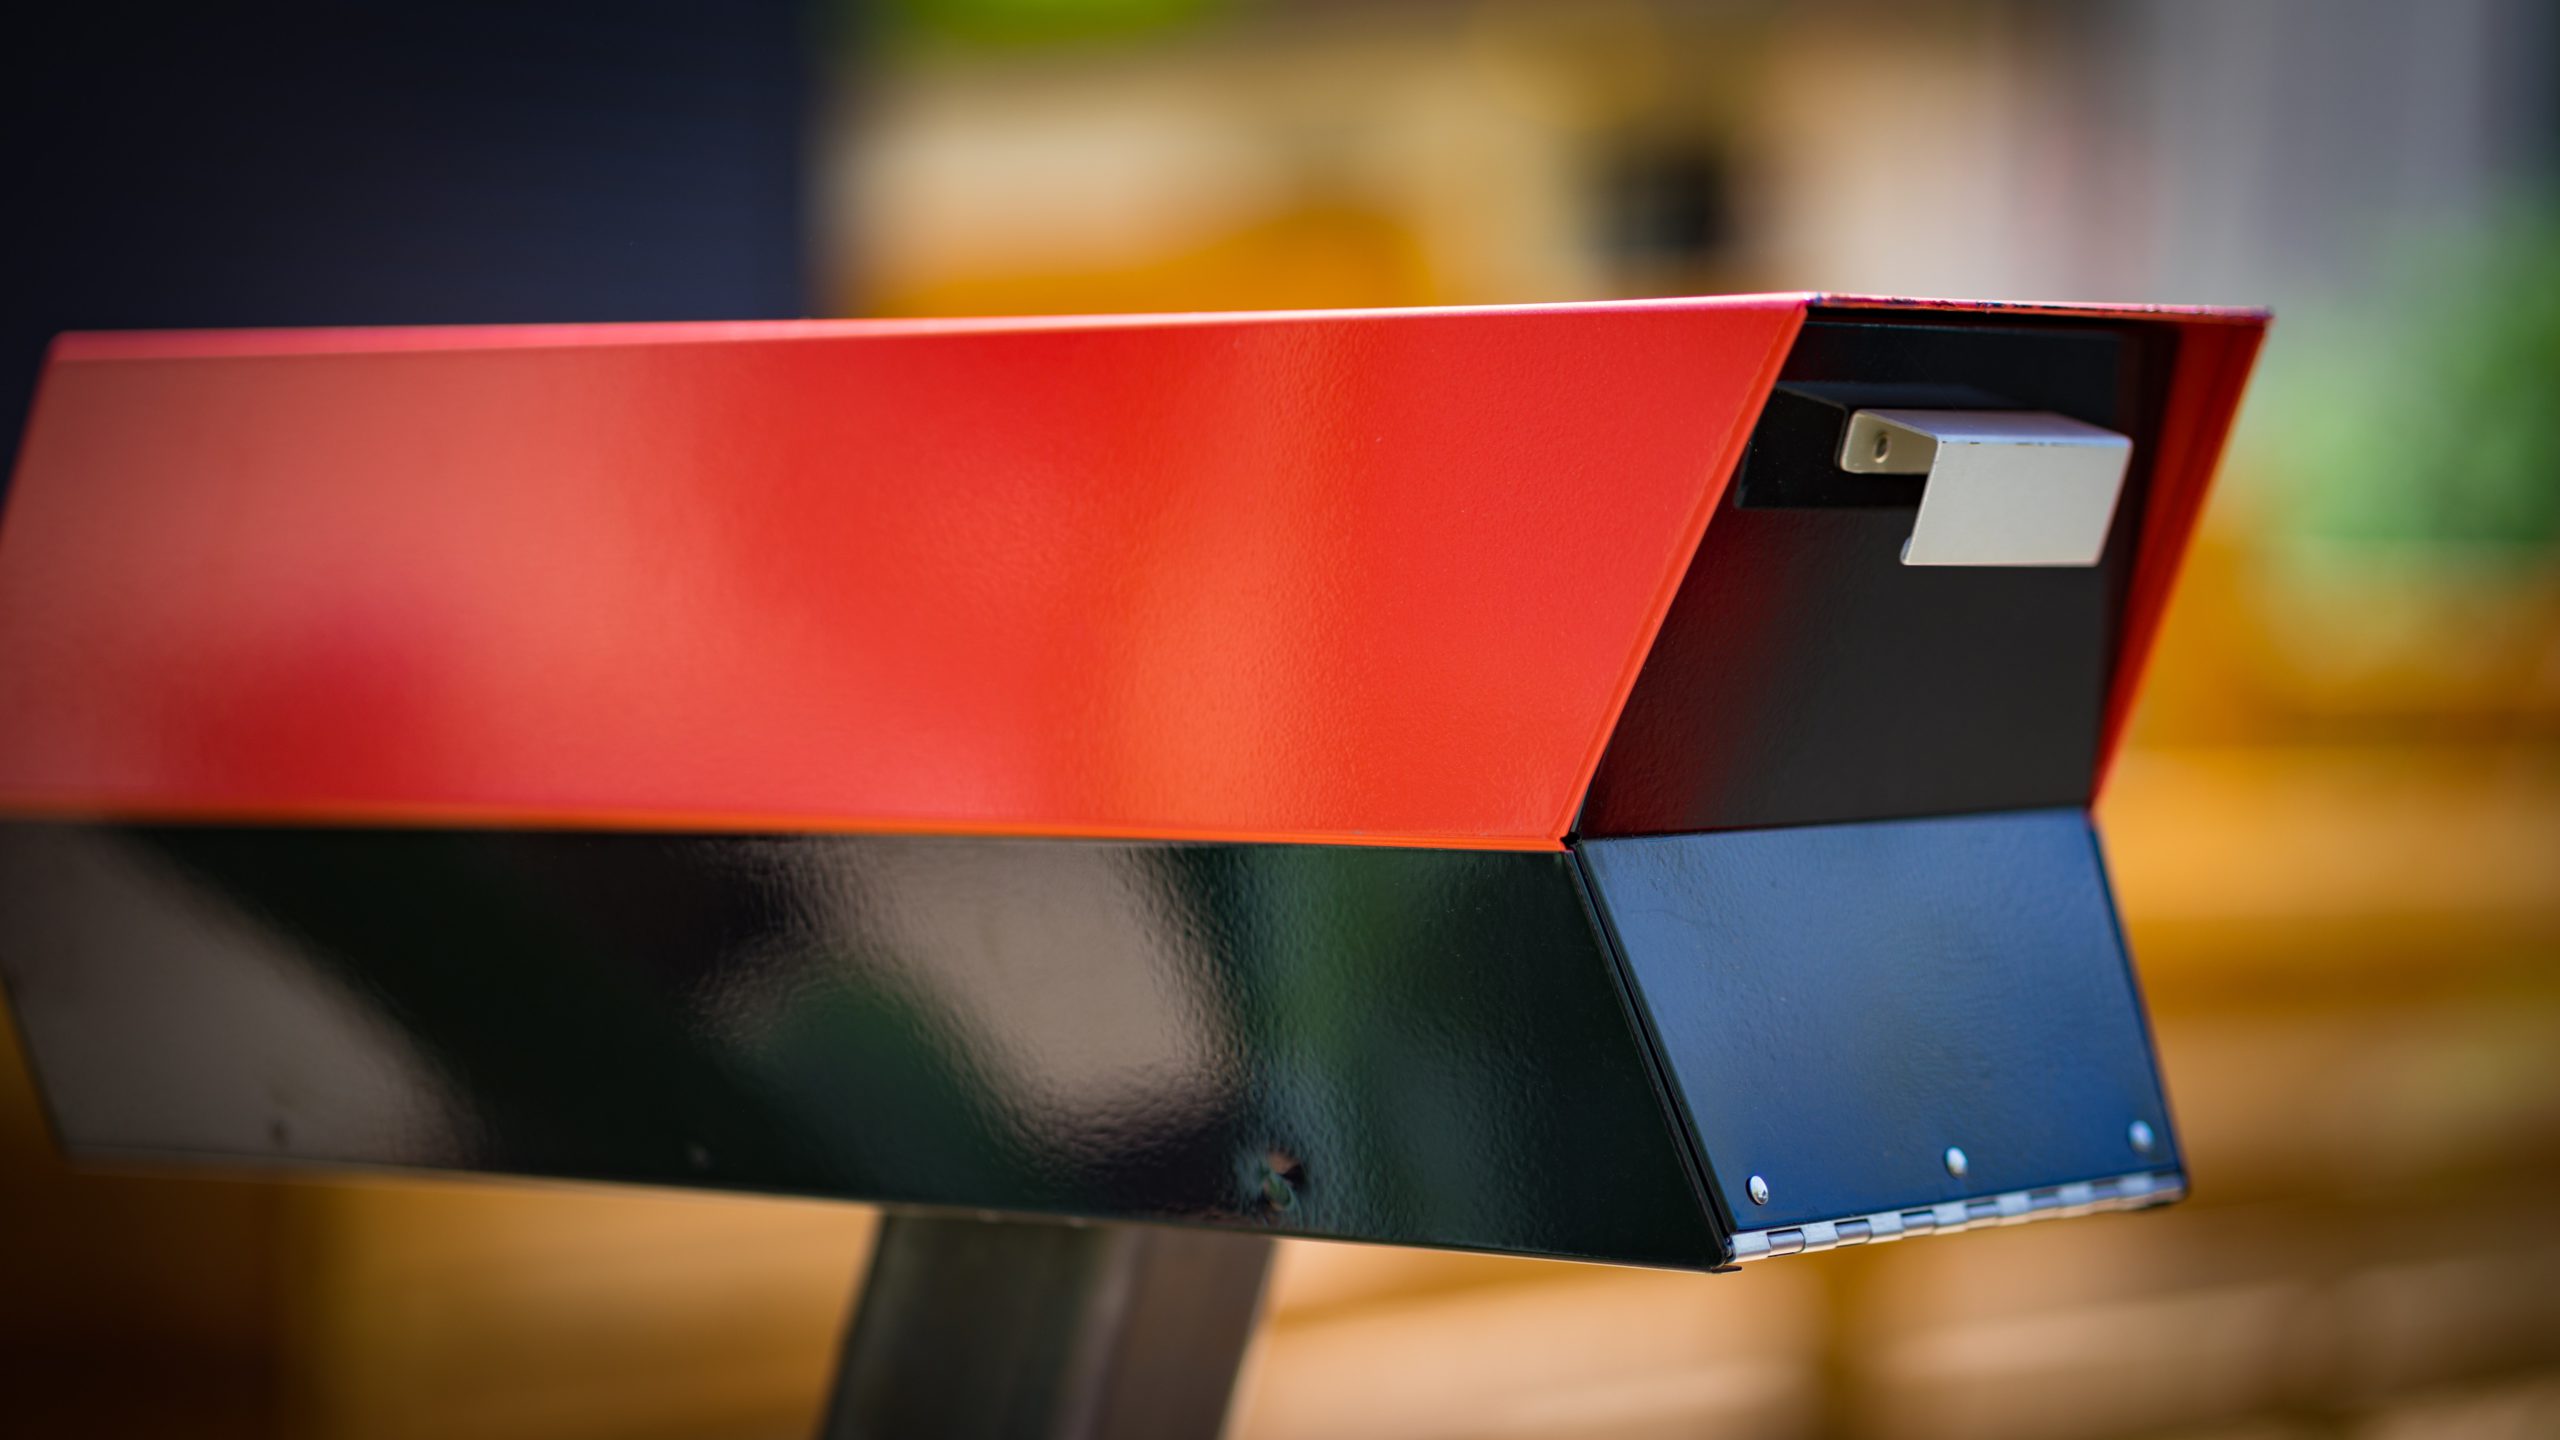 Modern mailbox with red and black paint